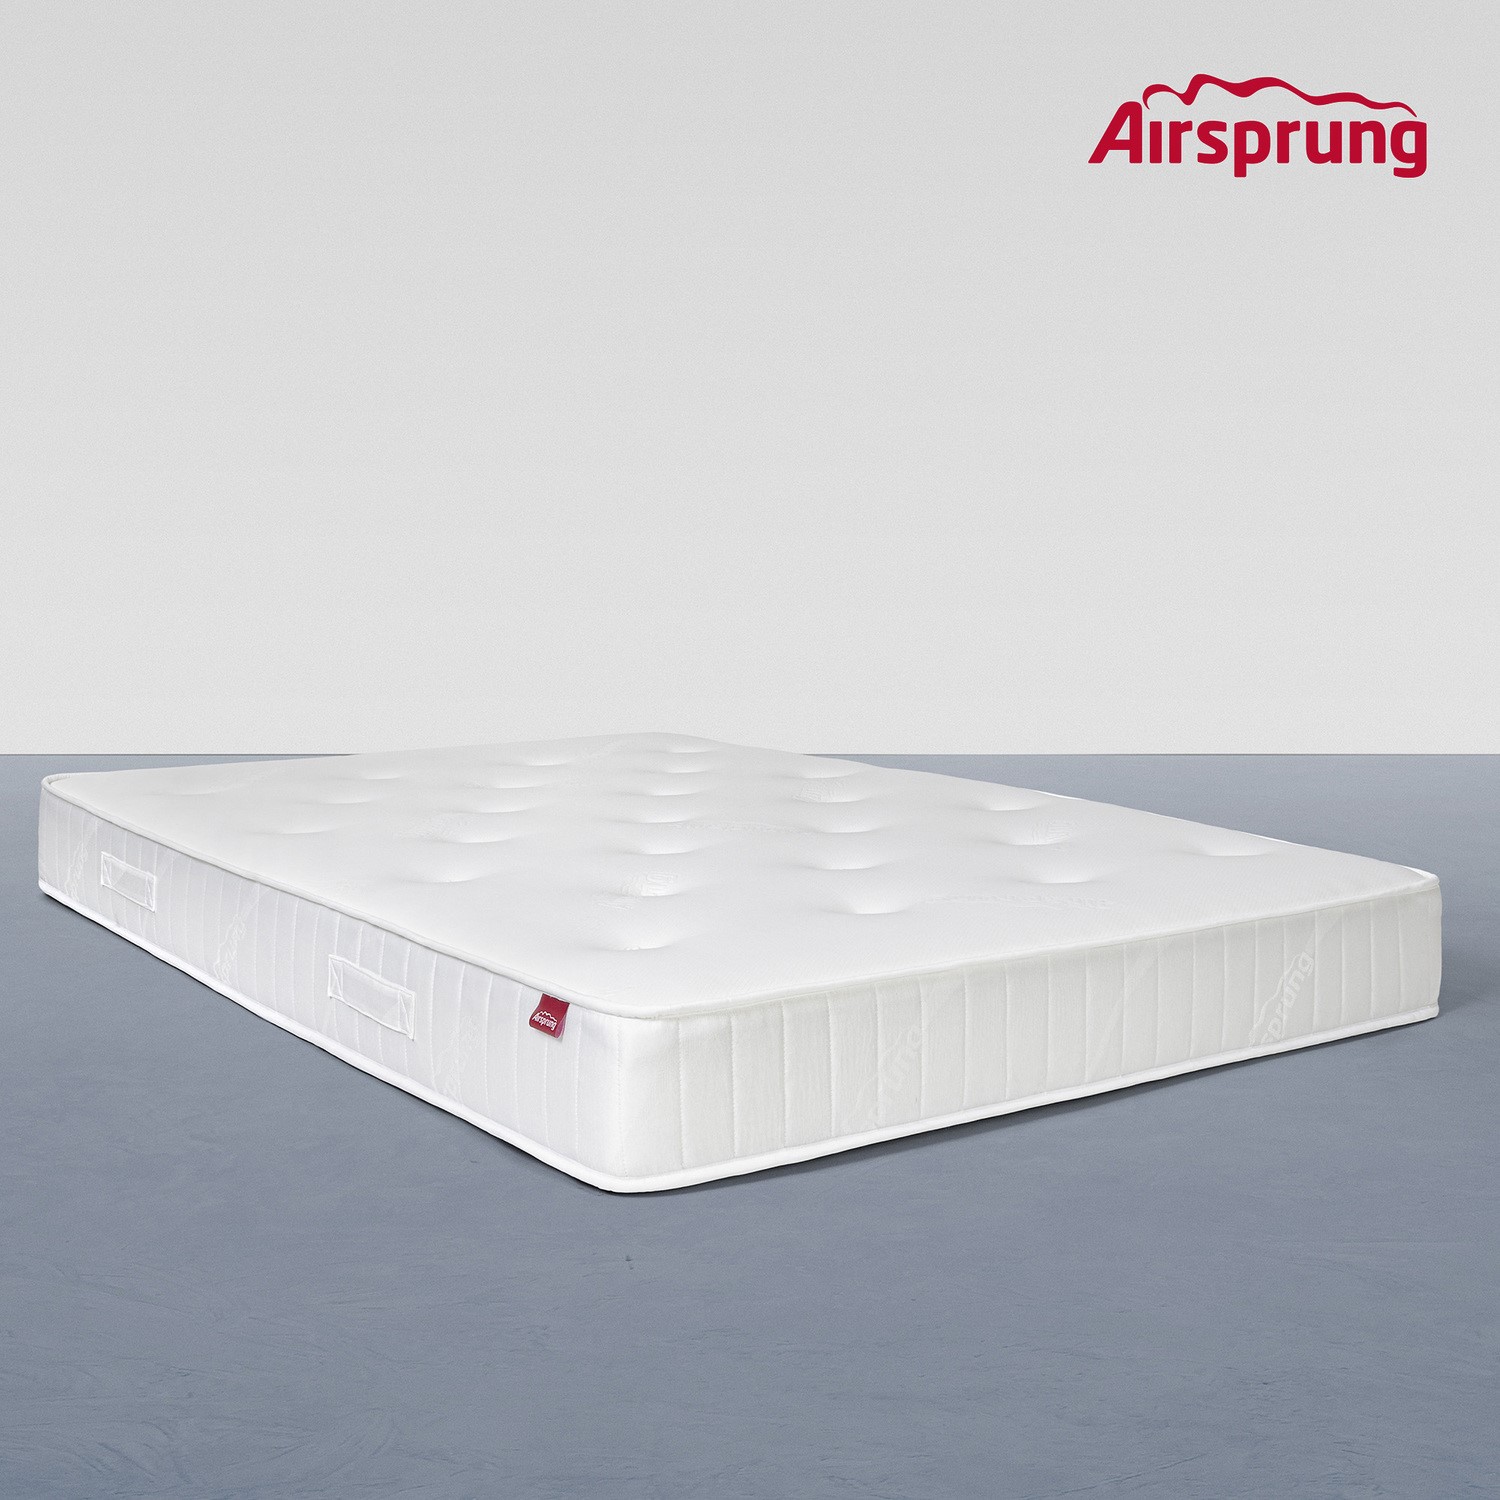 Read more about Small double rolled extra firm open coil spring mattress airsprung